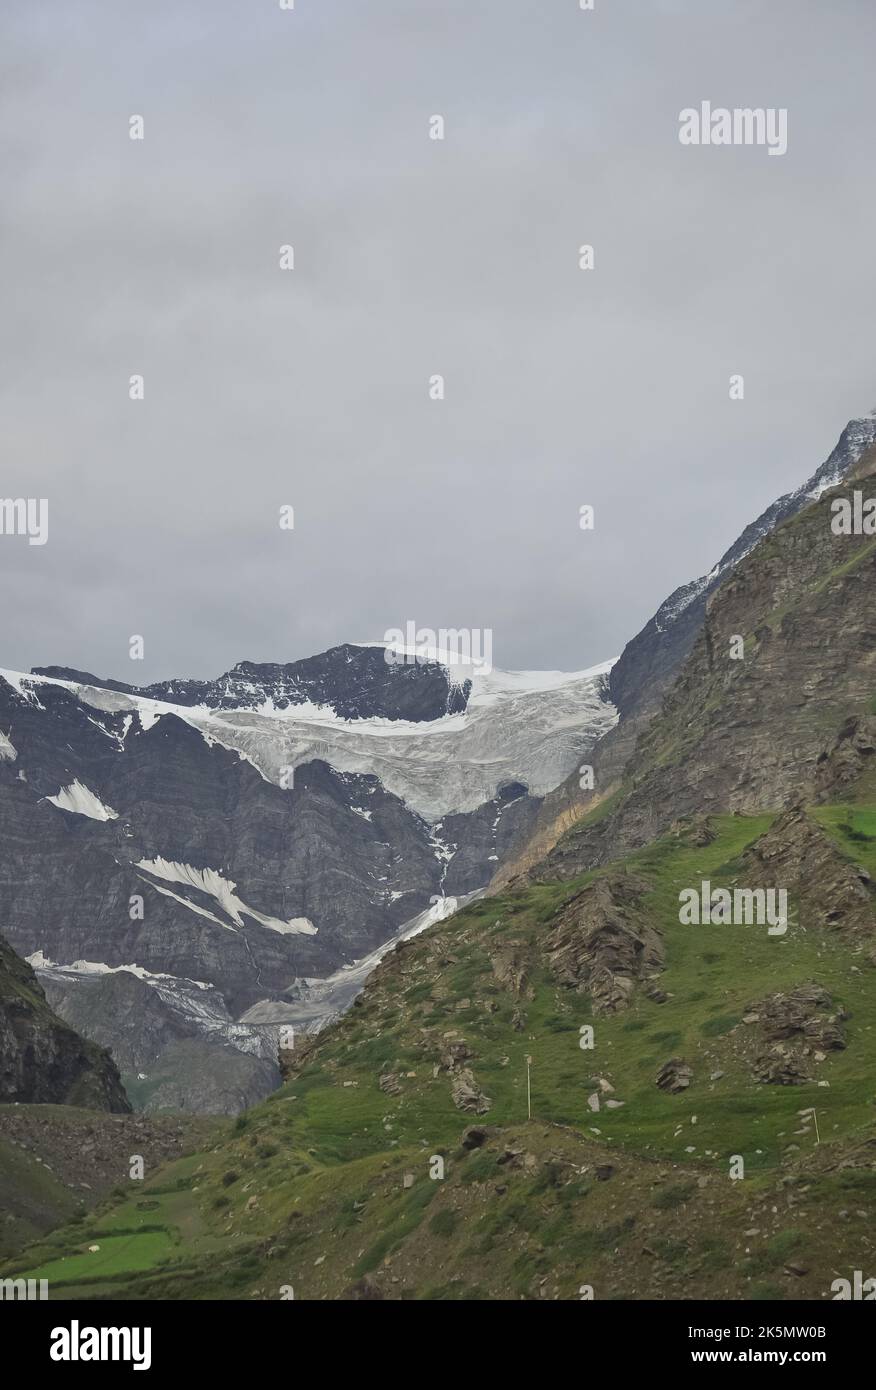 View of melting snow from rocky mountain during cloudy weather in Lahaul and Spiti, Himachal Pradesh, India. Stock Photo